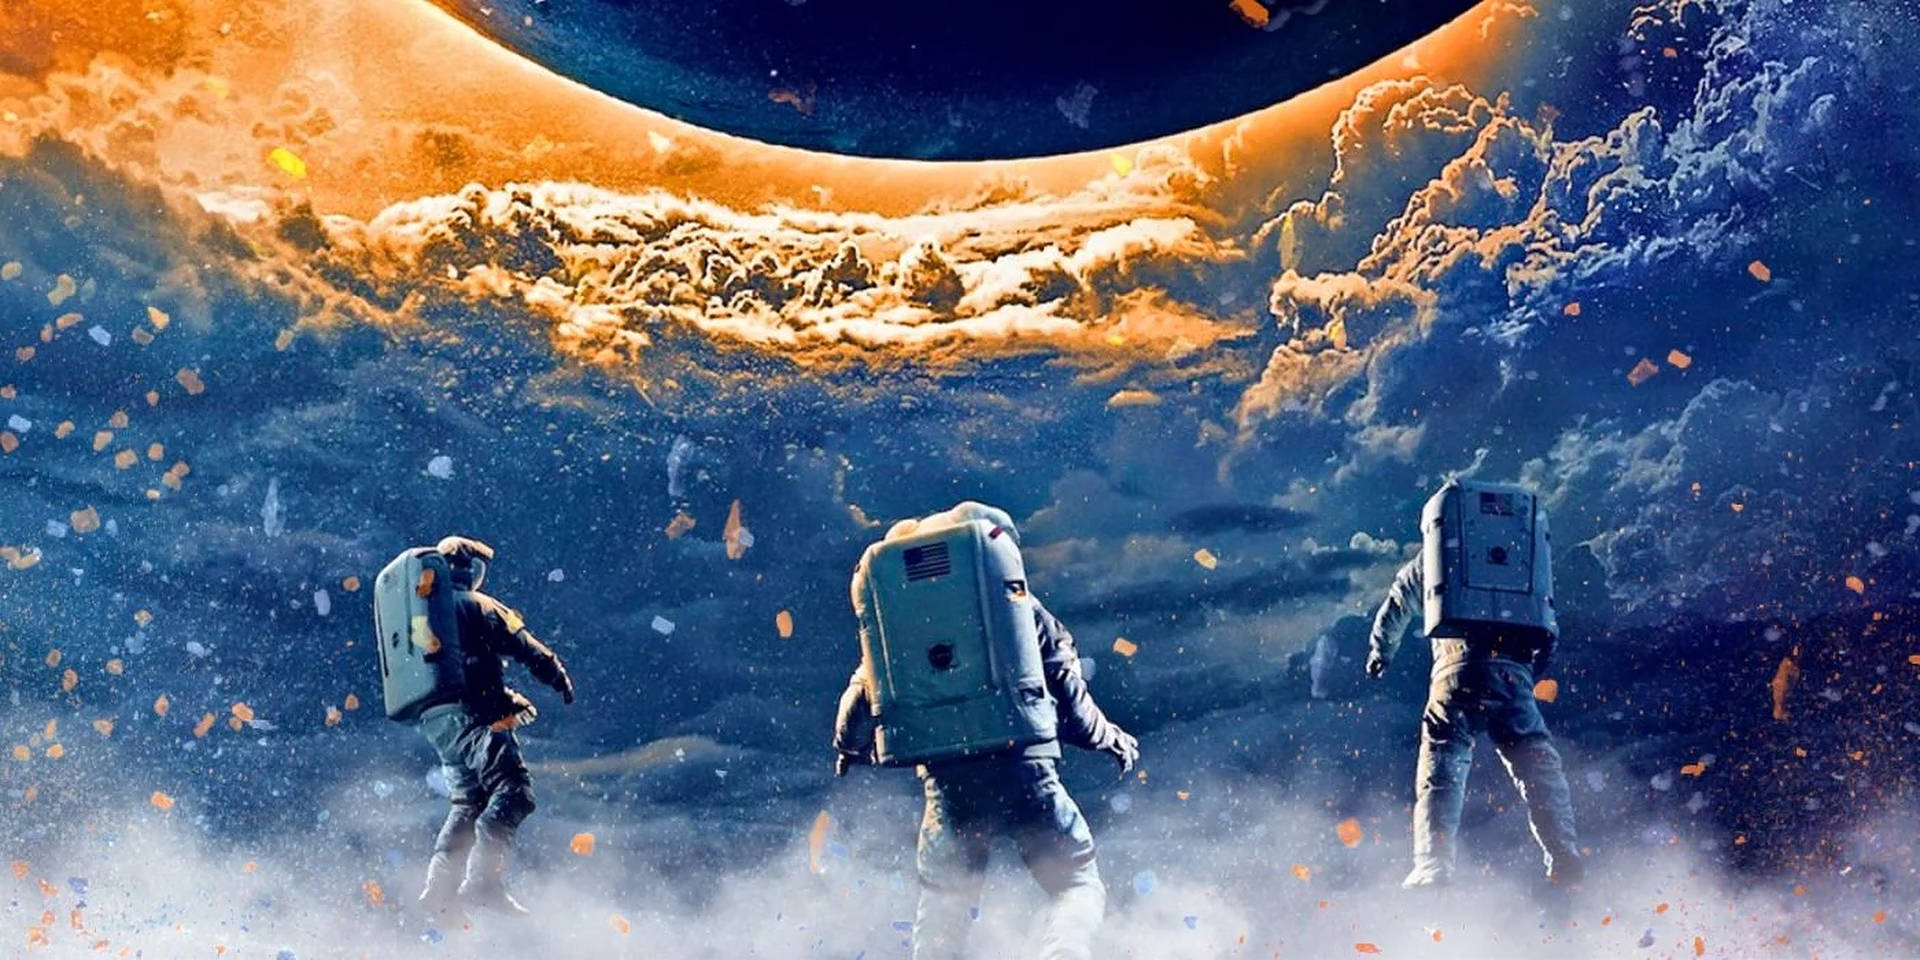 Floating Astronauts In Space Moonfall Wallpaper